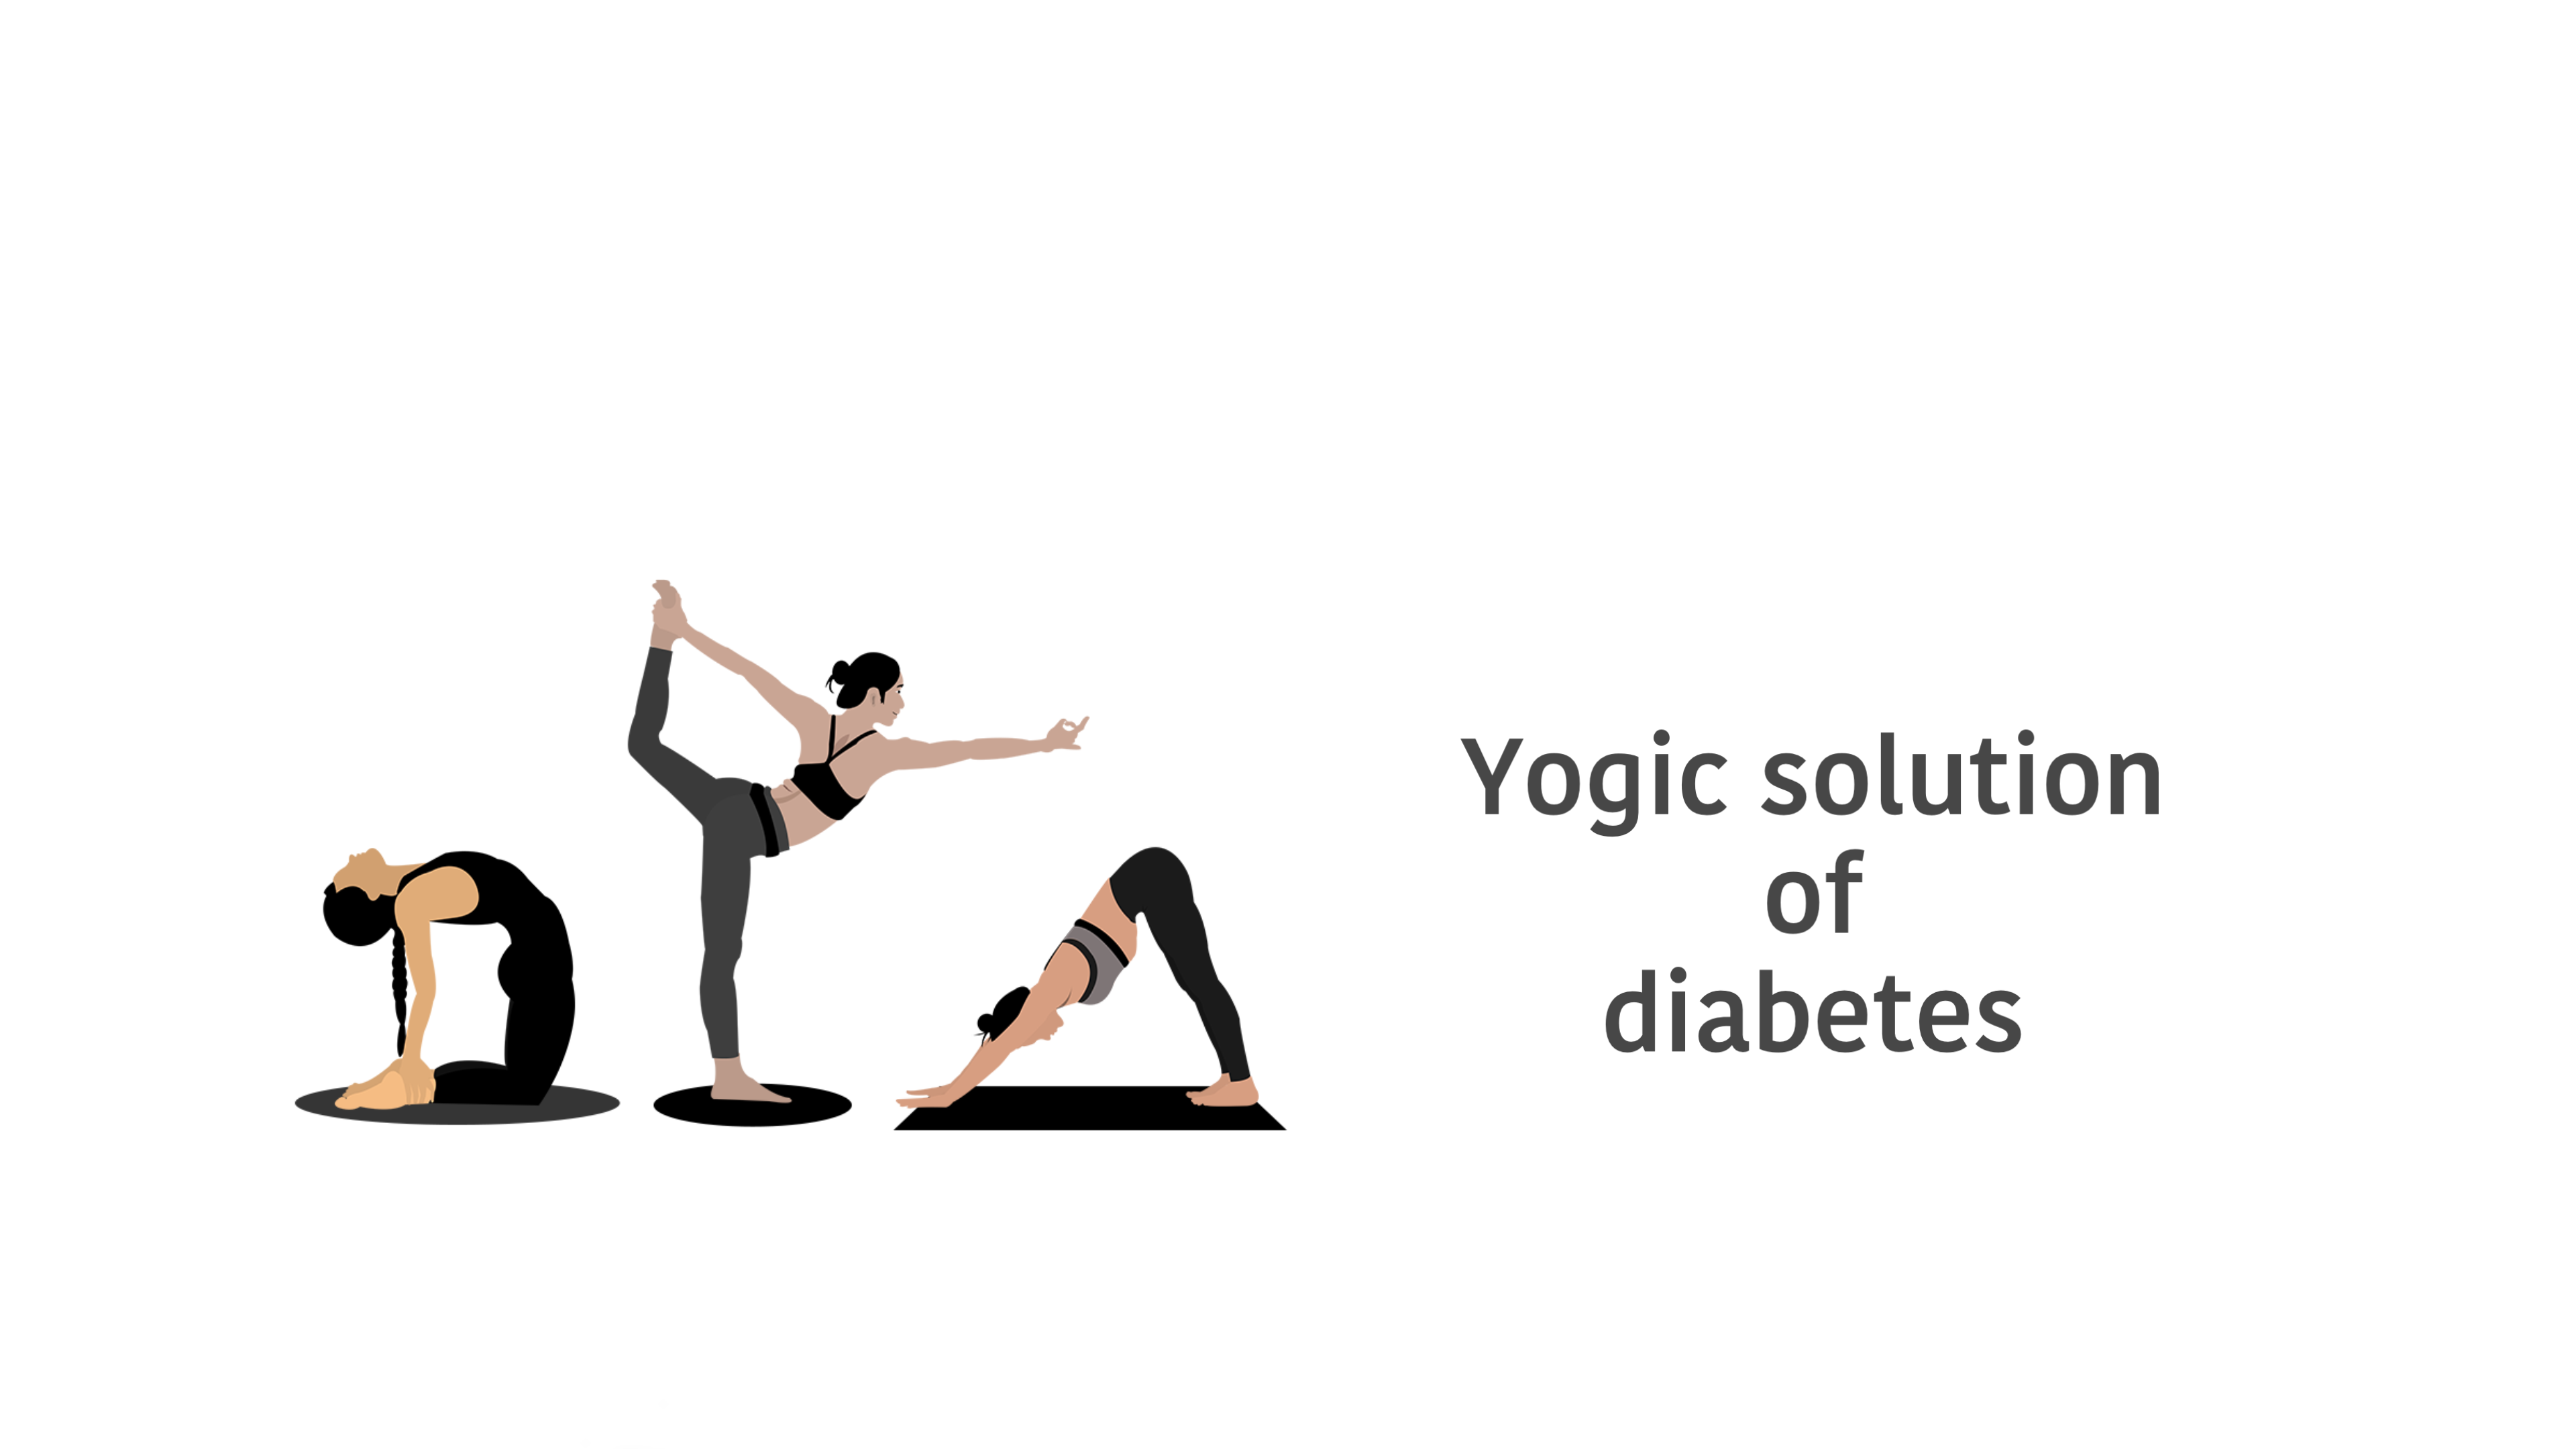 Yoga: A Holistic Approach to Heart Health and Diabetes Management